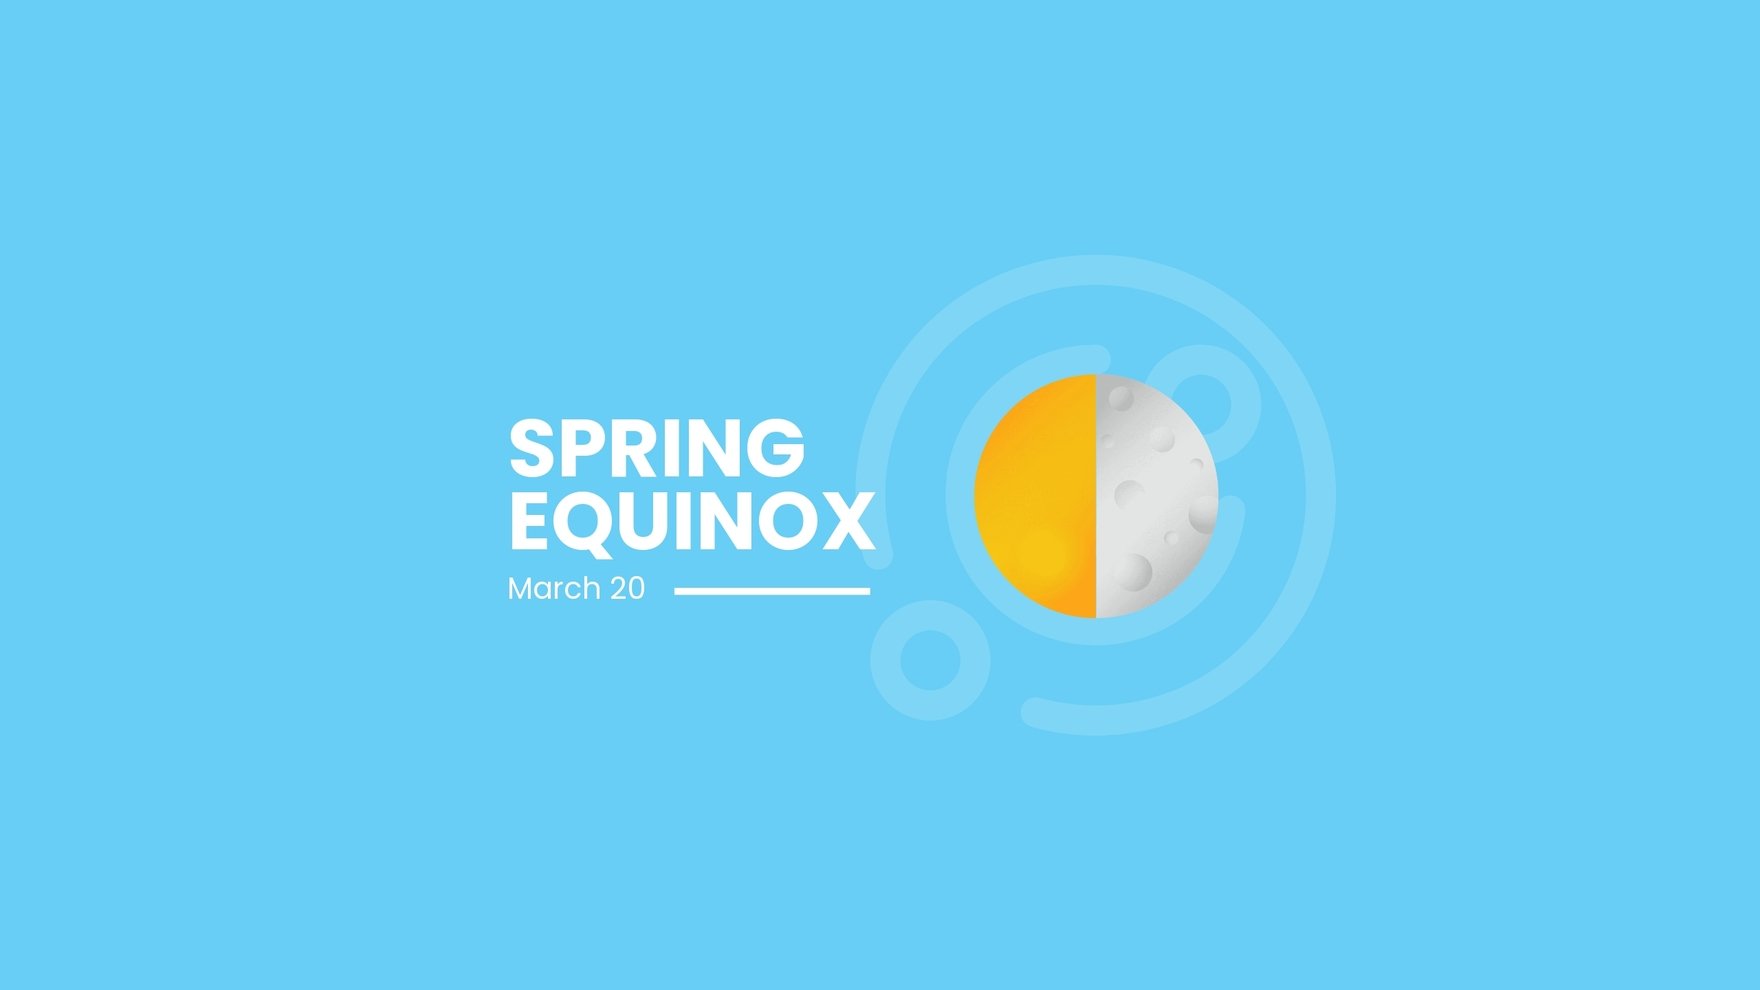 Spring Equinox YouTube Banner Template